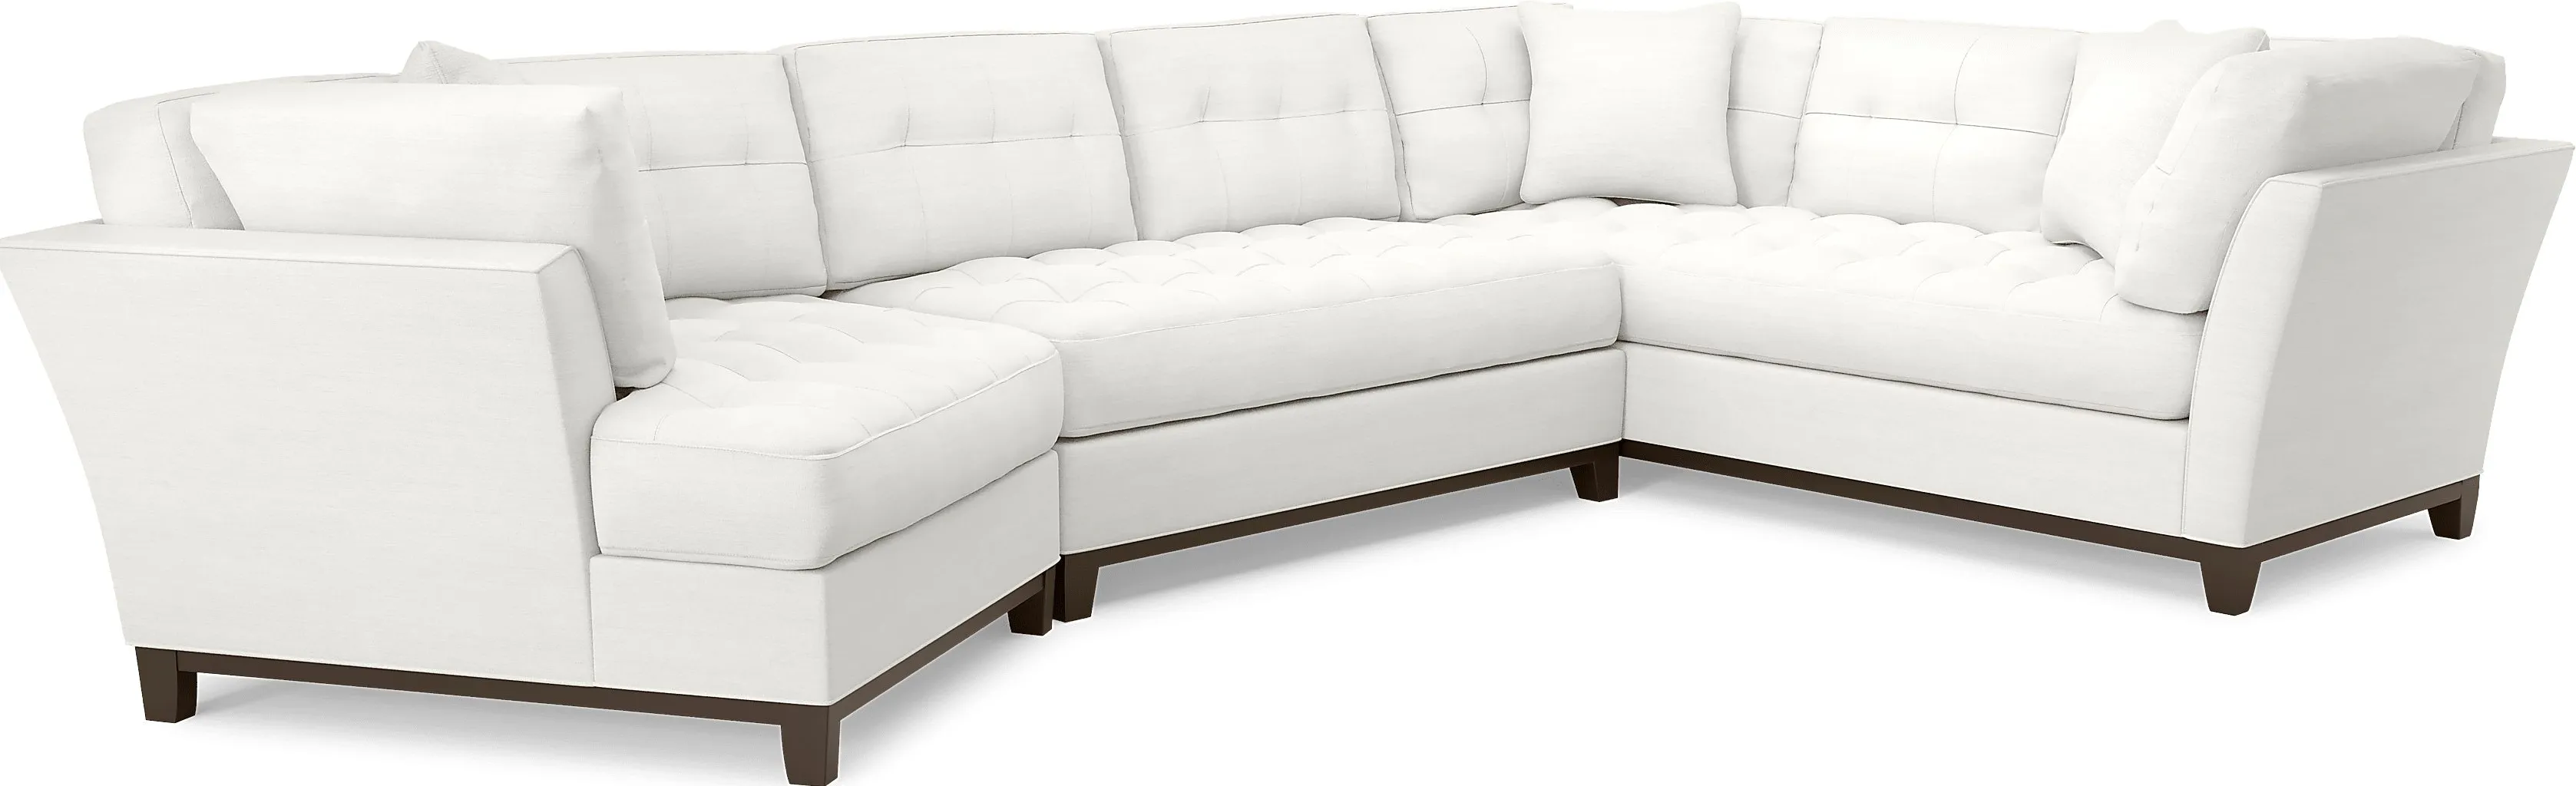 Metropolis Way White Textured 3 Pc Sectional with Cuddler